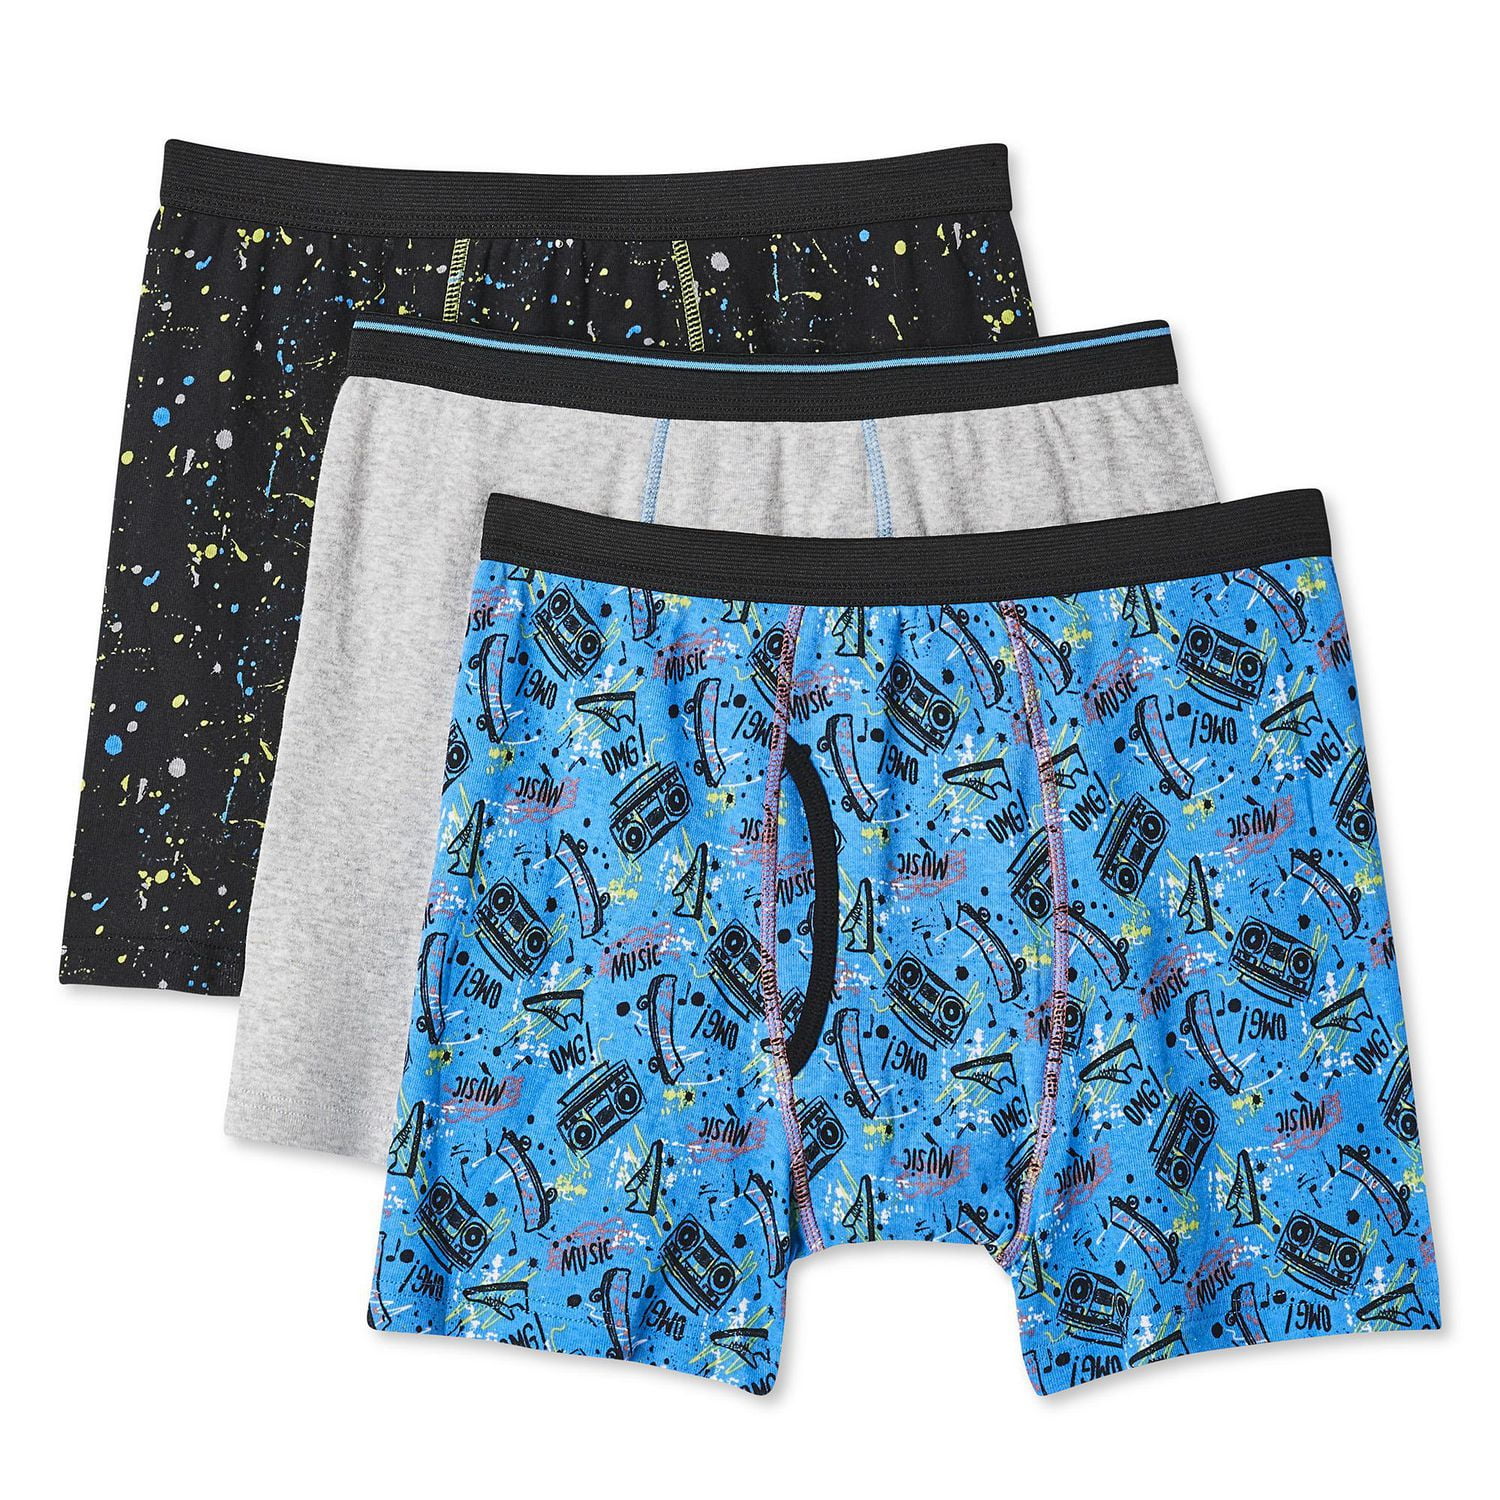 Made In Canada Men's Boxer Briefs - Little Blue House CA